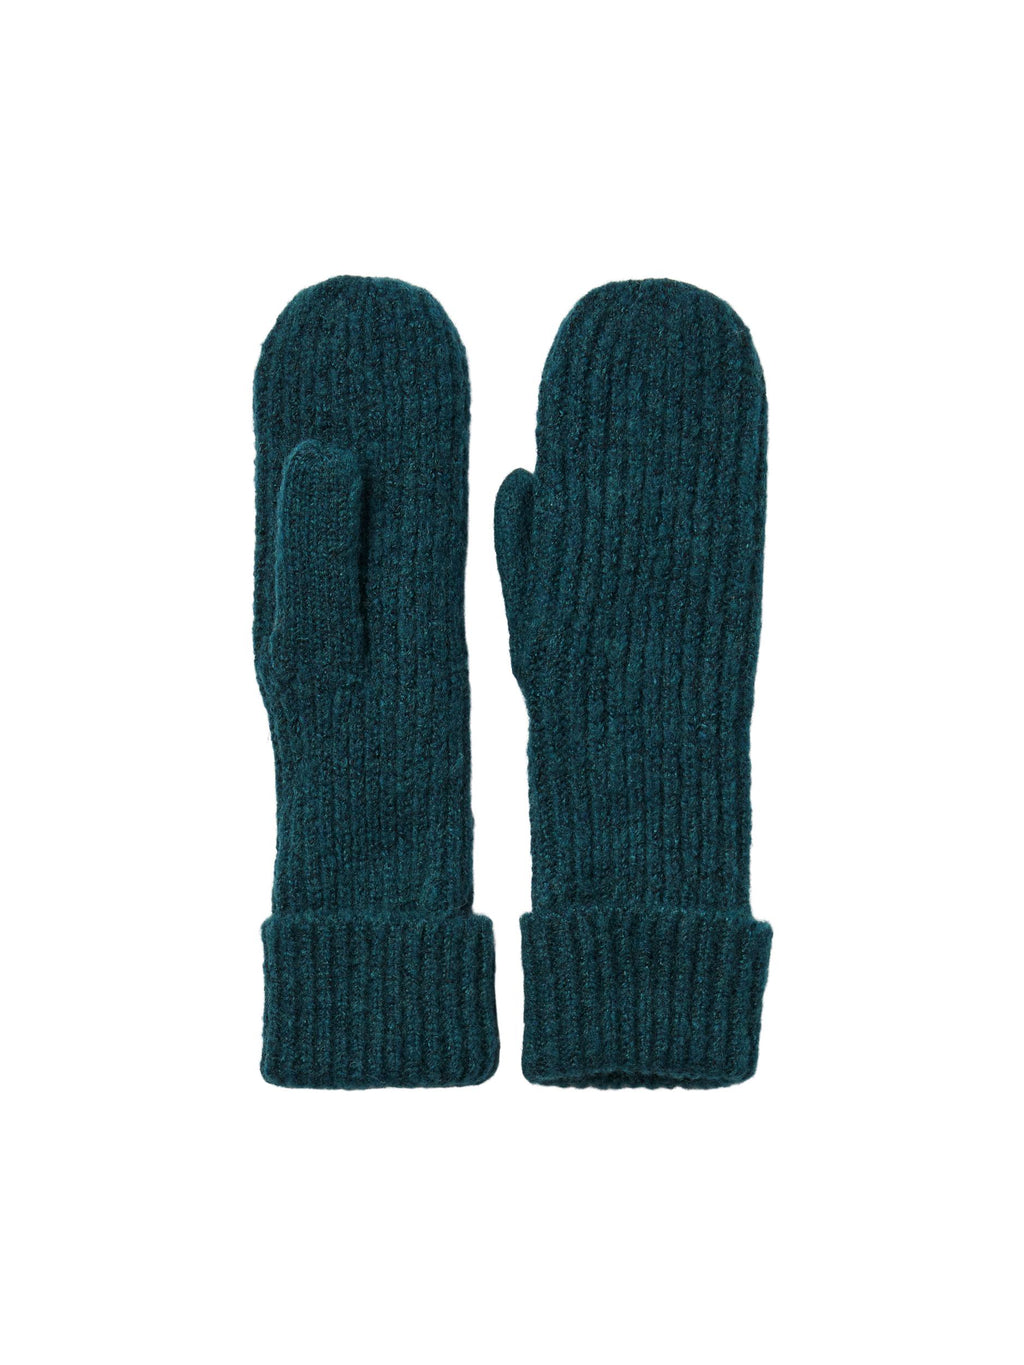 Pieces Pyron mittens